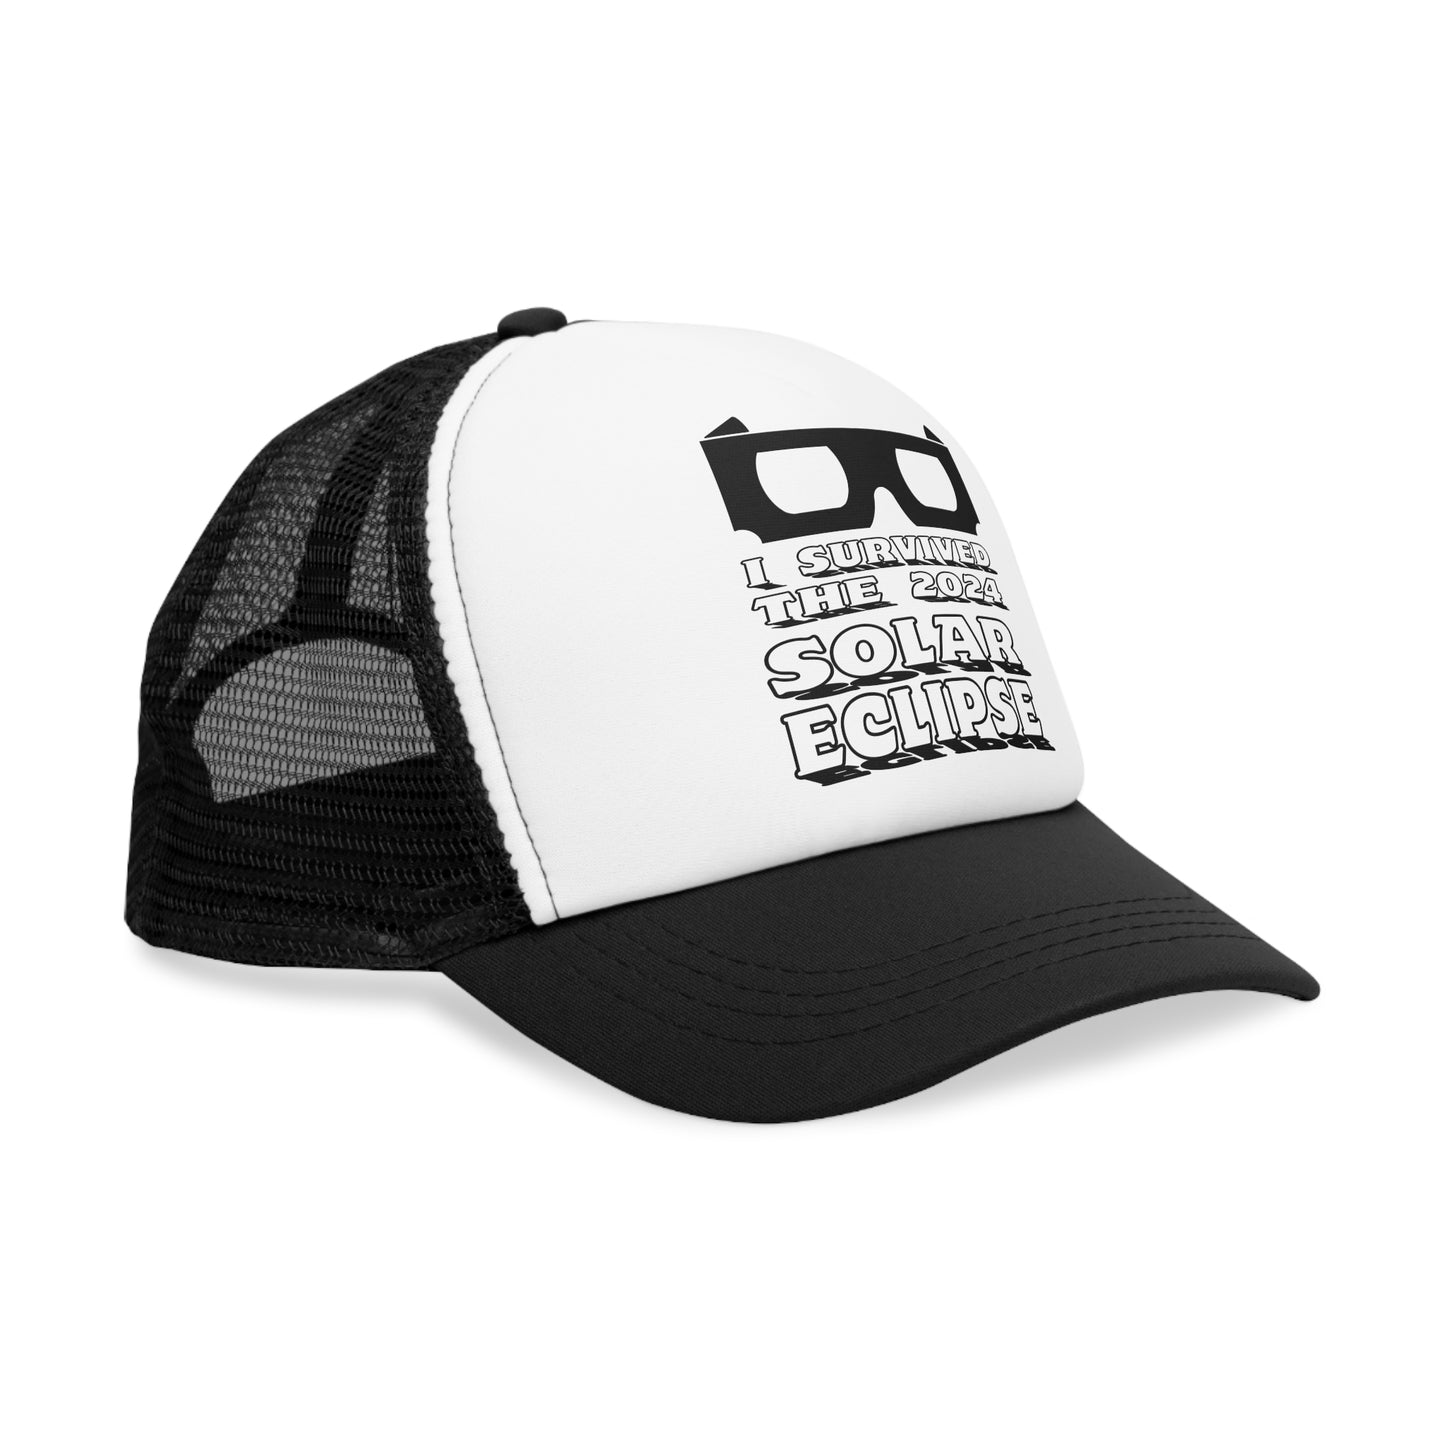 I Survived the Solar Eclipse Truckers Cap